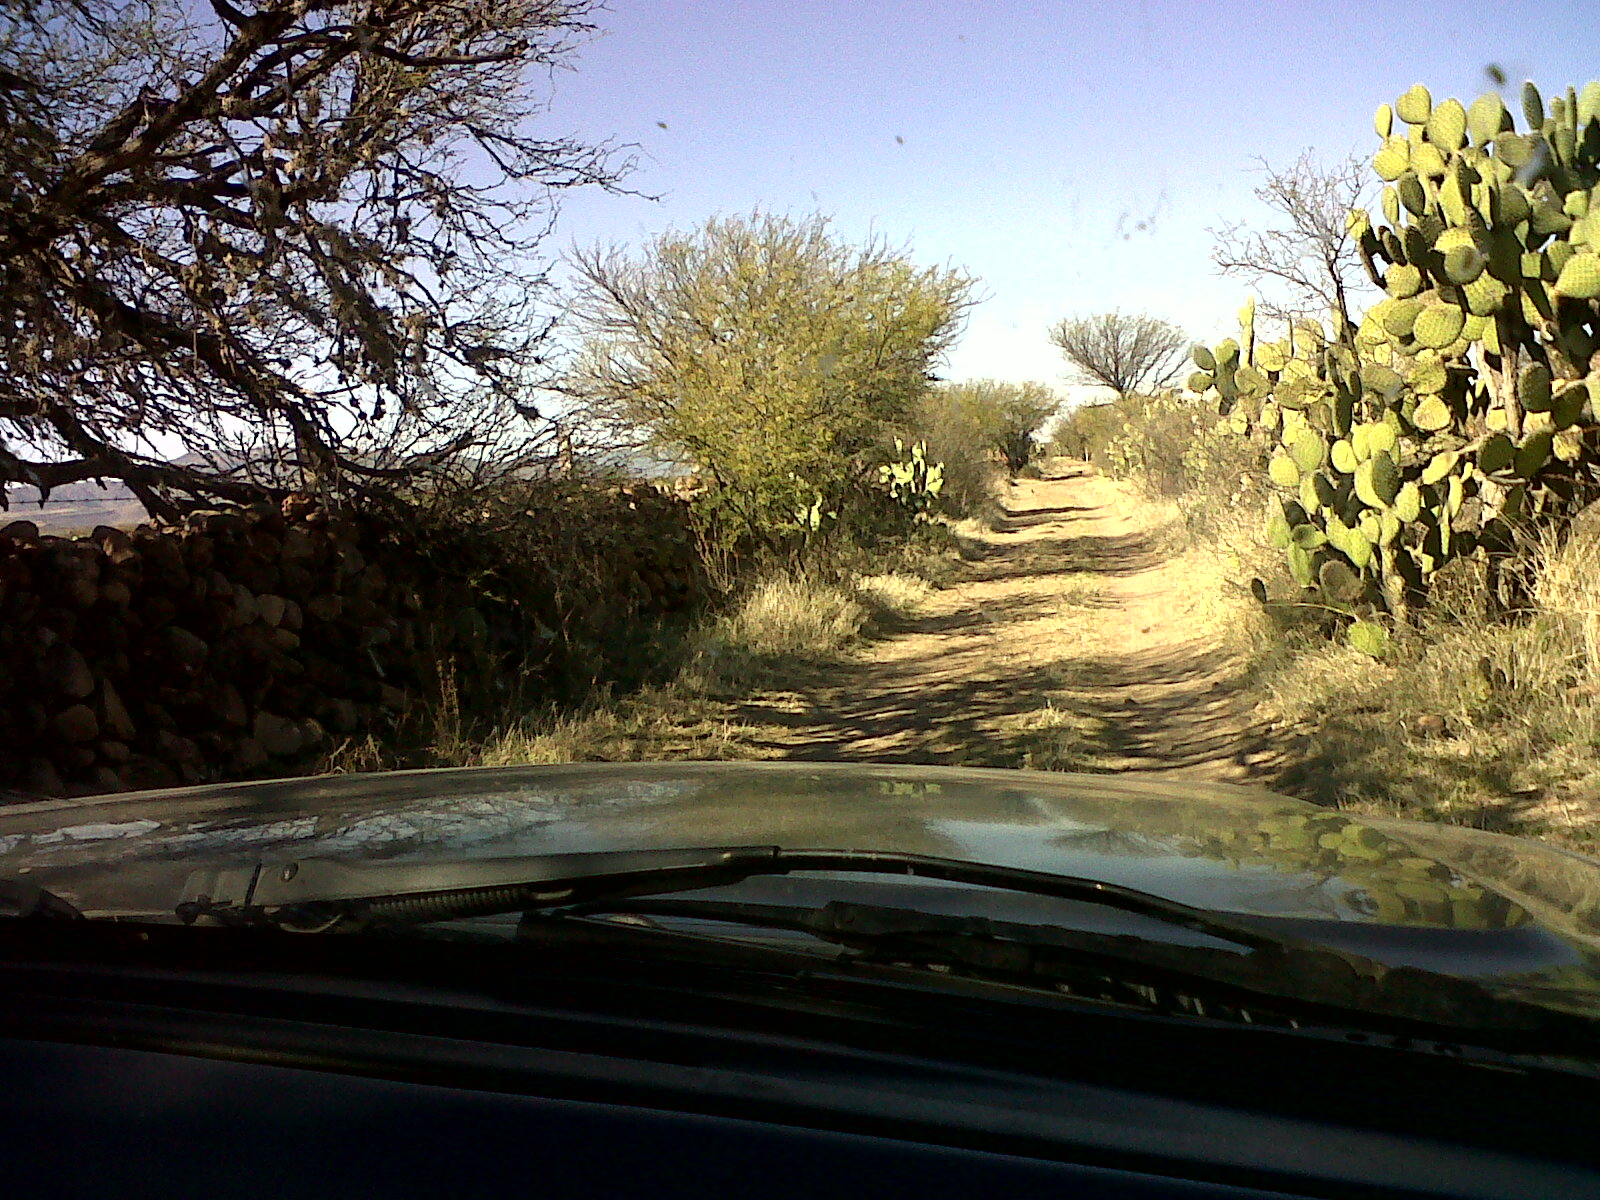 the view from a car window, of a dirt road with cactus trees in the distance